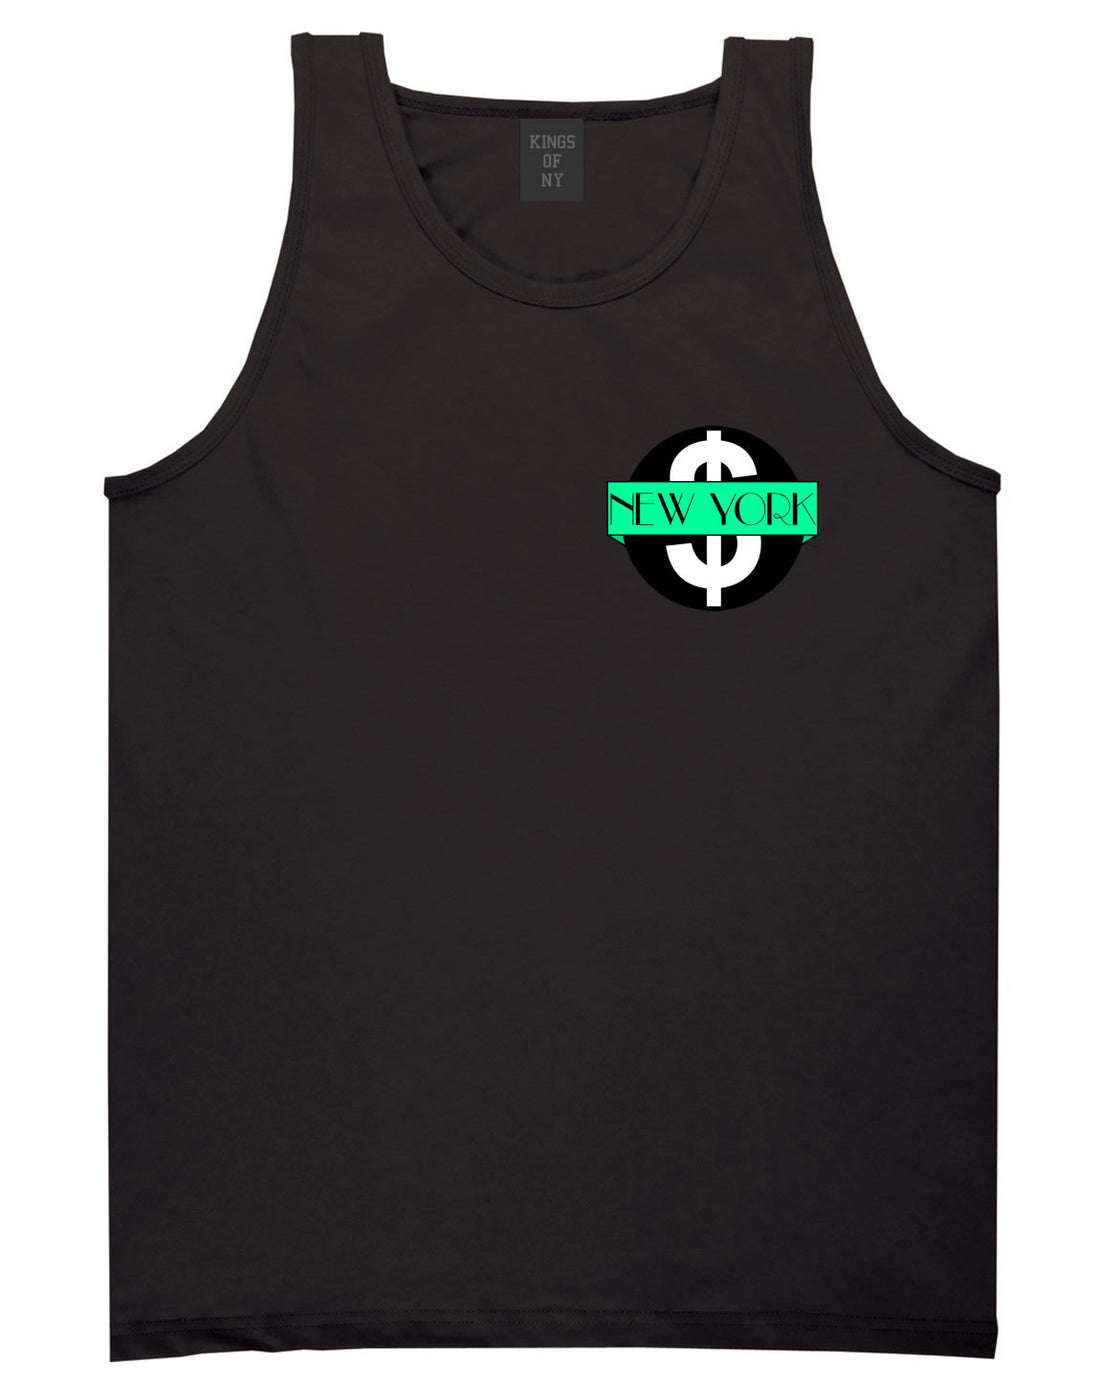 New York Mint Chest Logo Tank Top in Black By Kings Of NY